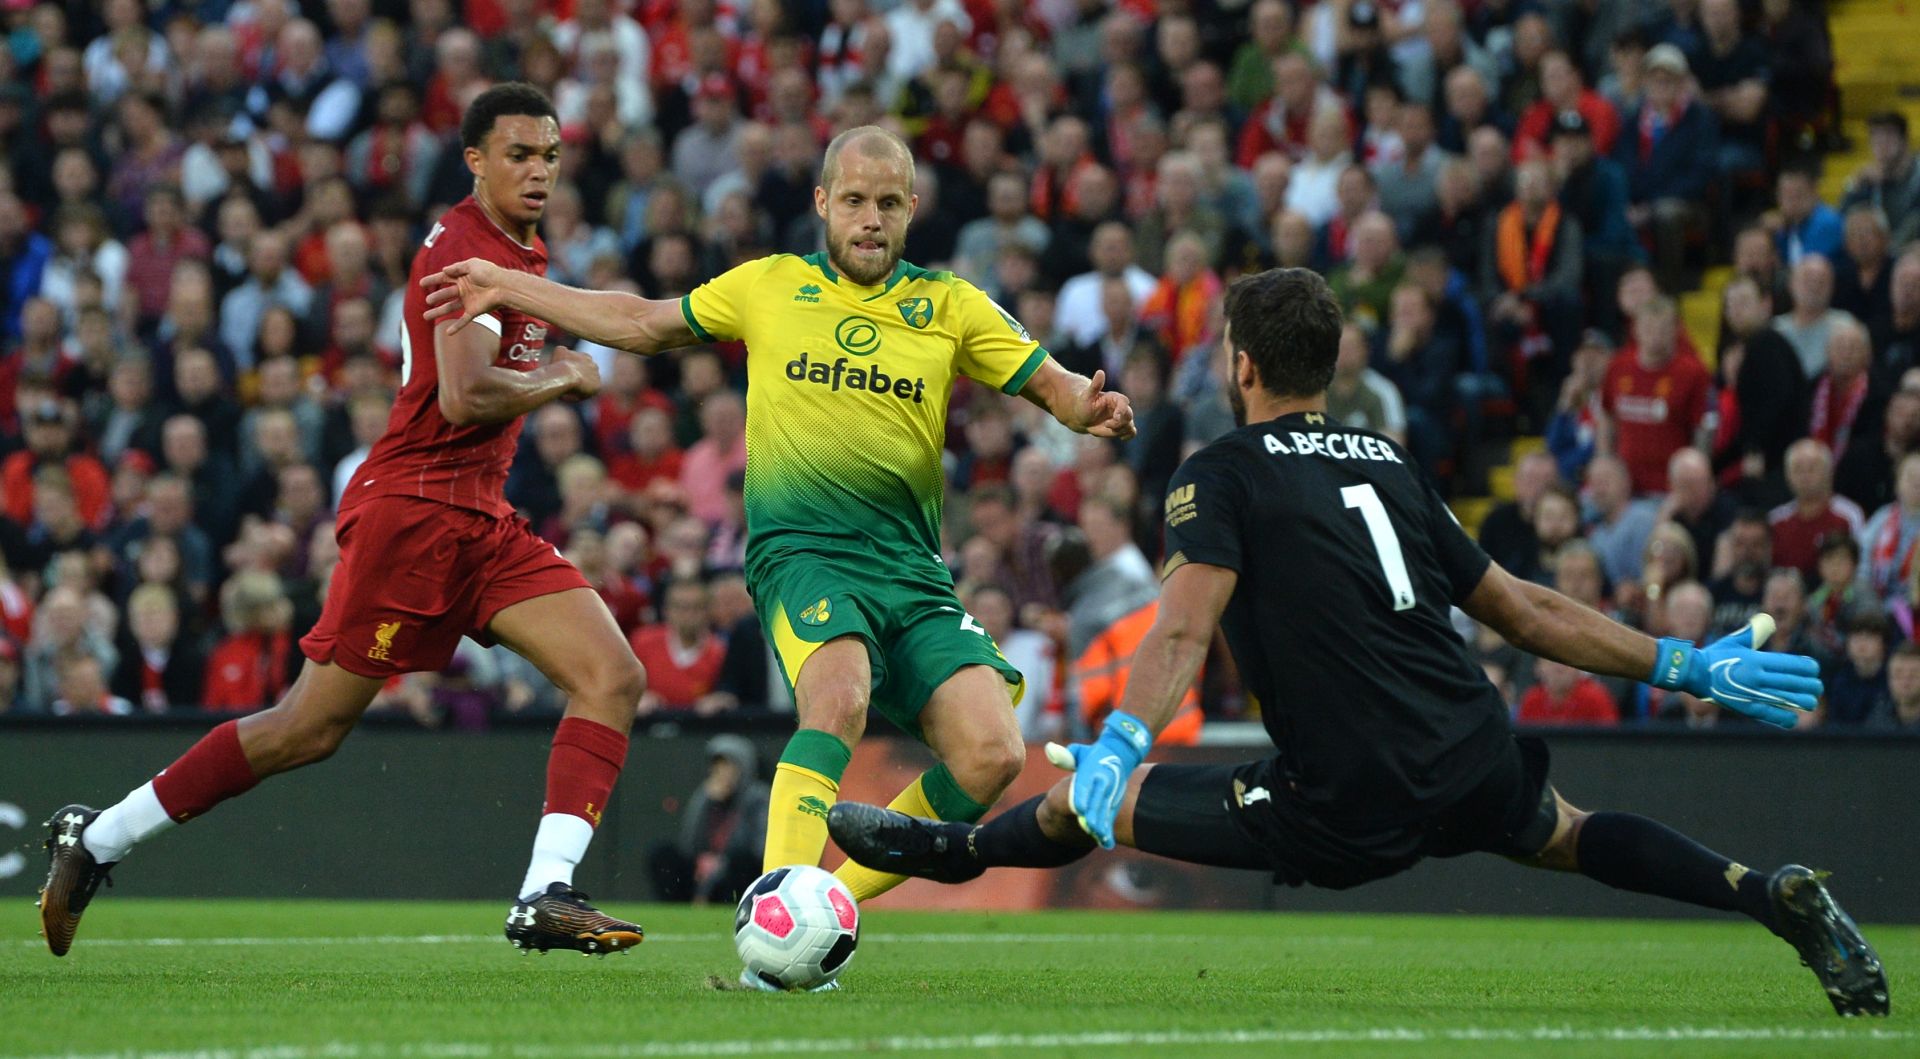 epa07764830 Teemu Pukki (C) of Norwich City  in action during the English Premier League soccer match between Liverpool FC and Norwich City at Anfield, Liverpool, Britain, 09 August 2019.  EPA/PETER POWELL EDITORIAL USE ONLY. No use with unauthorized audio, video, data, fixture lists, club/league logos or 'live' services. Online in-match use limited to 120 images, no video emulation. No use in betting, games or single club/league/player publications